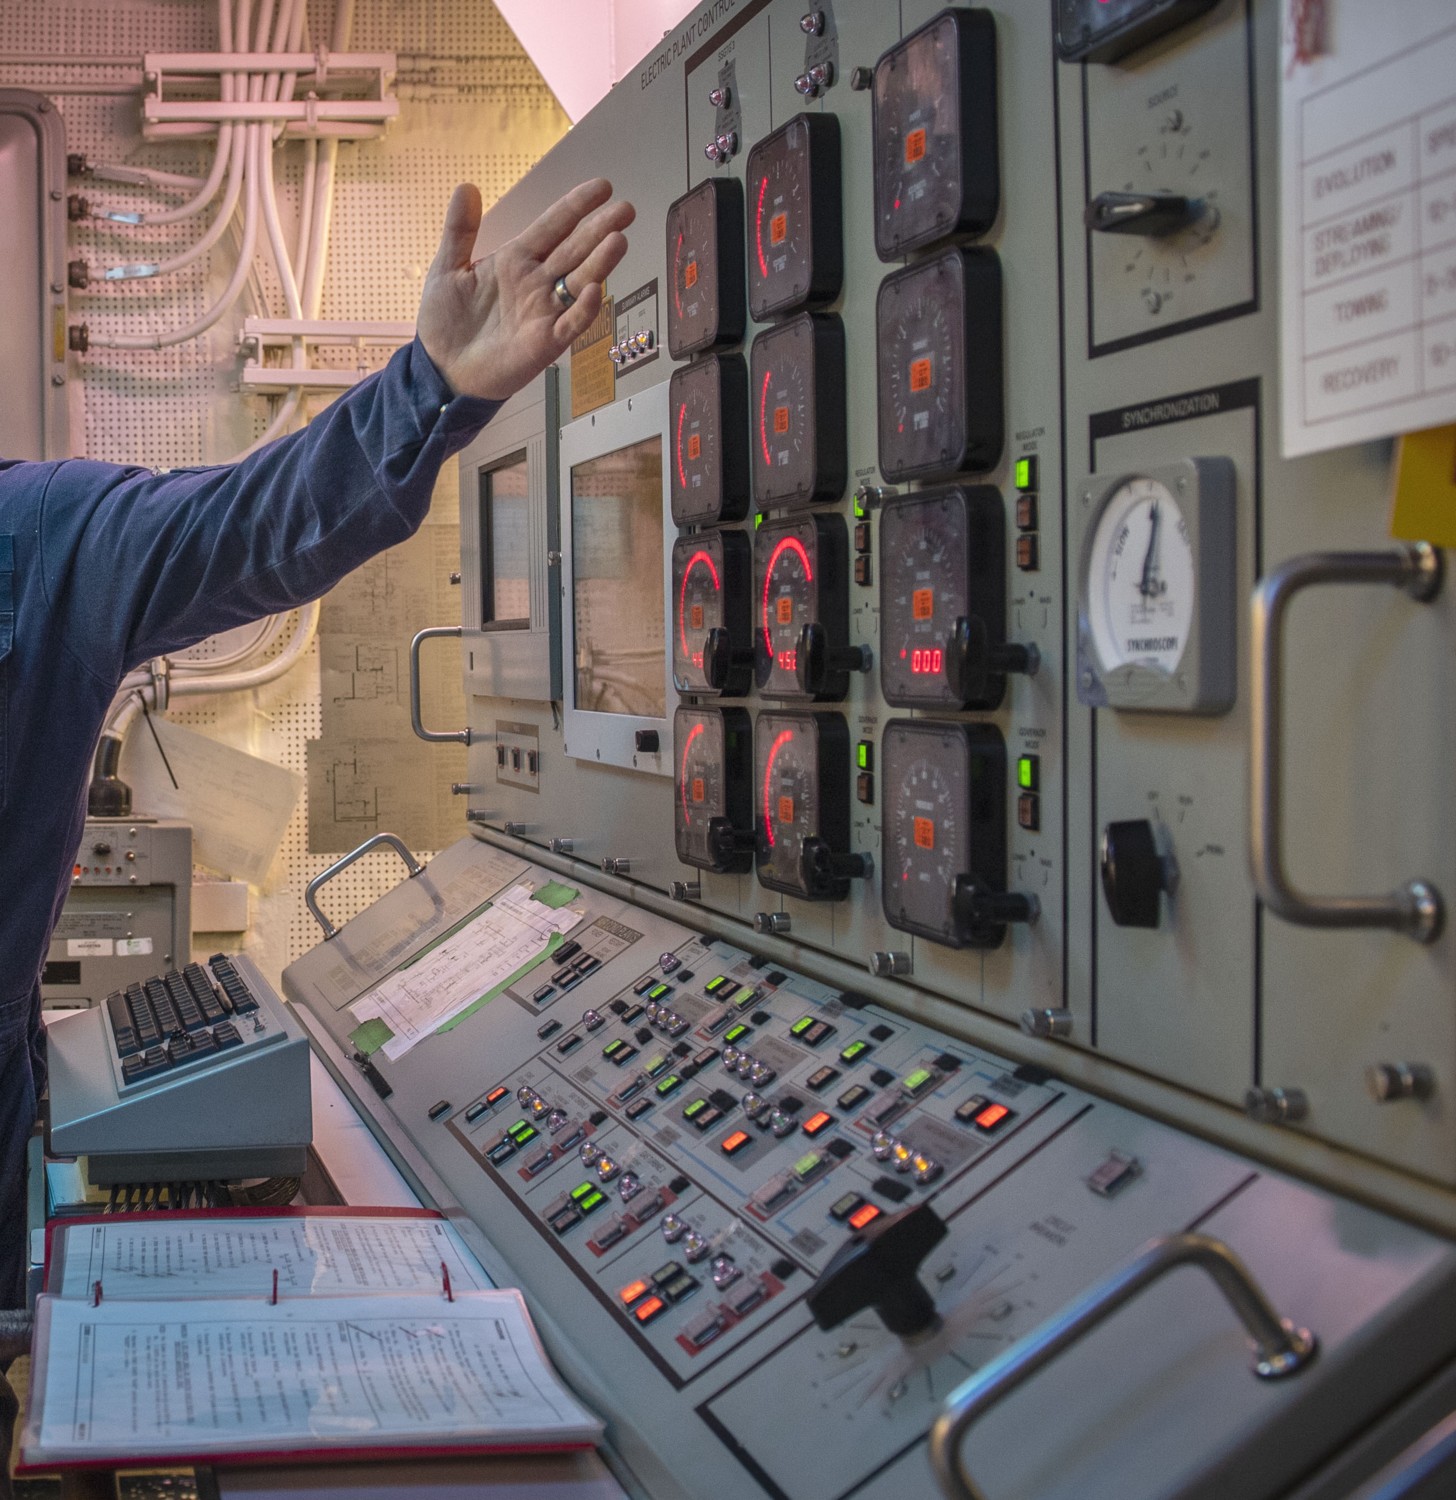 ddg-107 uss gravely arleigh burke class guided missile destroyer aegis us navy electric plant console 65